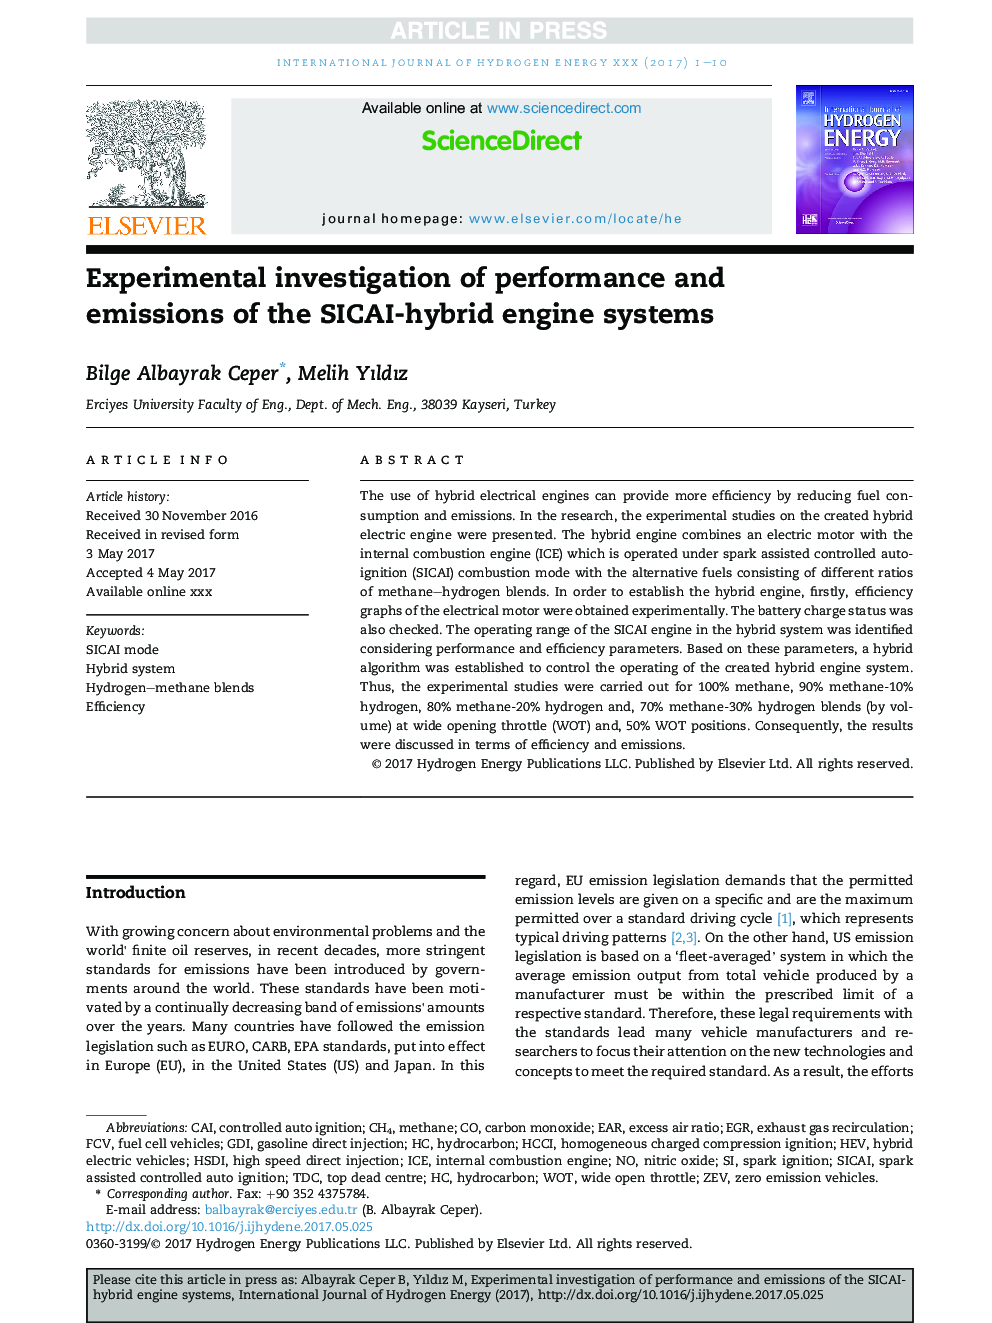 Experimental investigation of performance and emissions of the SICAI-hybrid engine systems